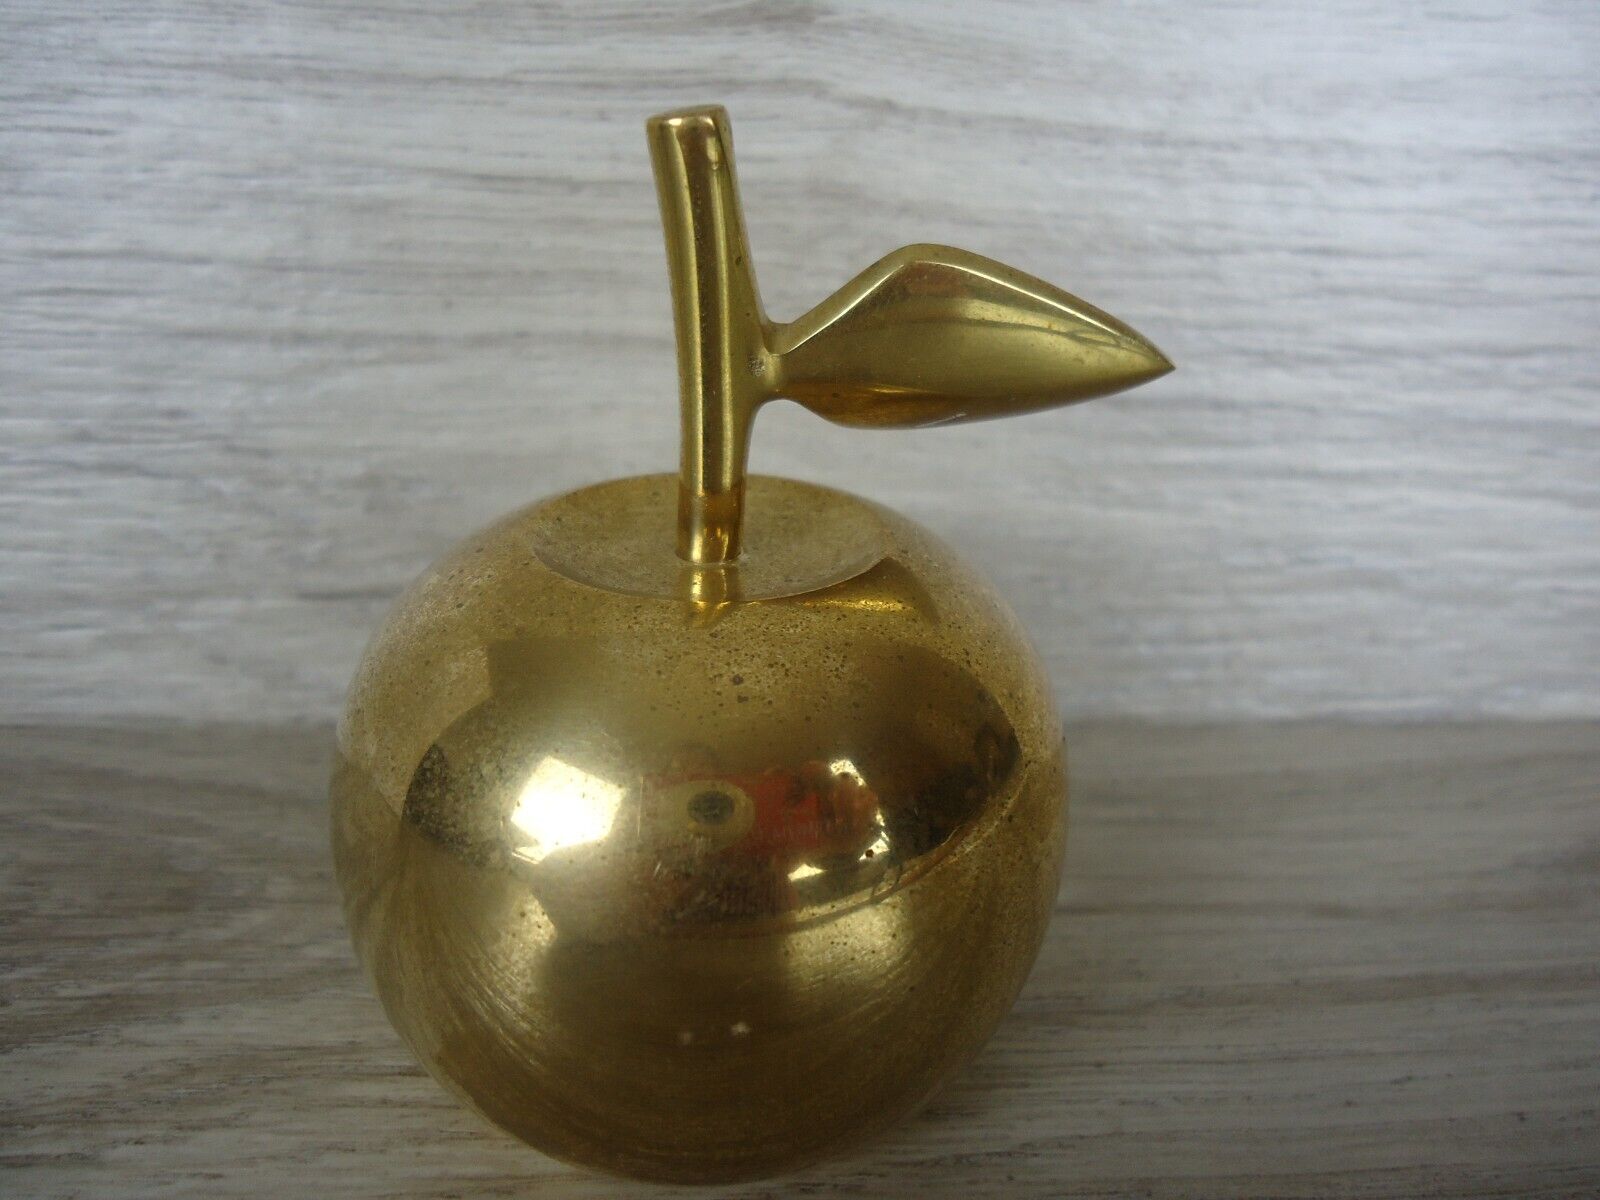 VTG Brass Apple Bell Paperweight 70s Decor Farm Country Orchard Maximalist Retro